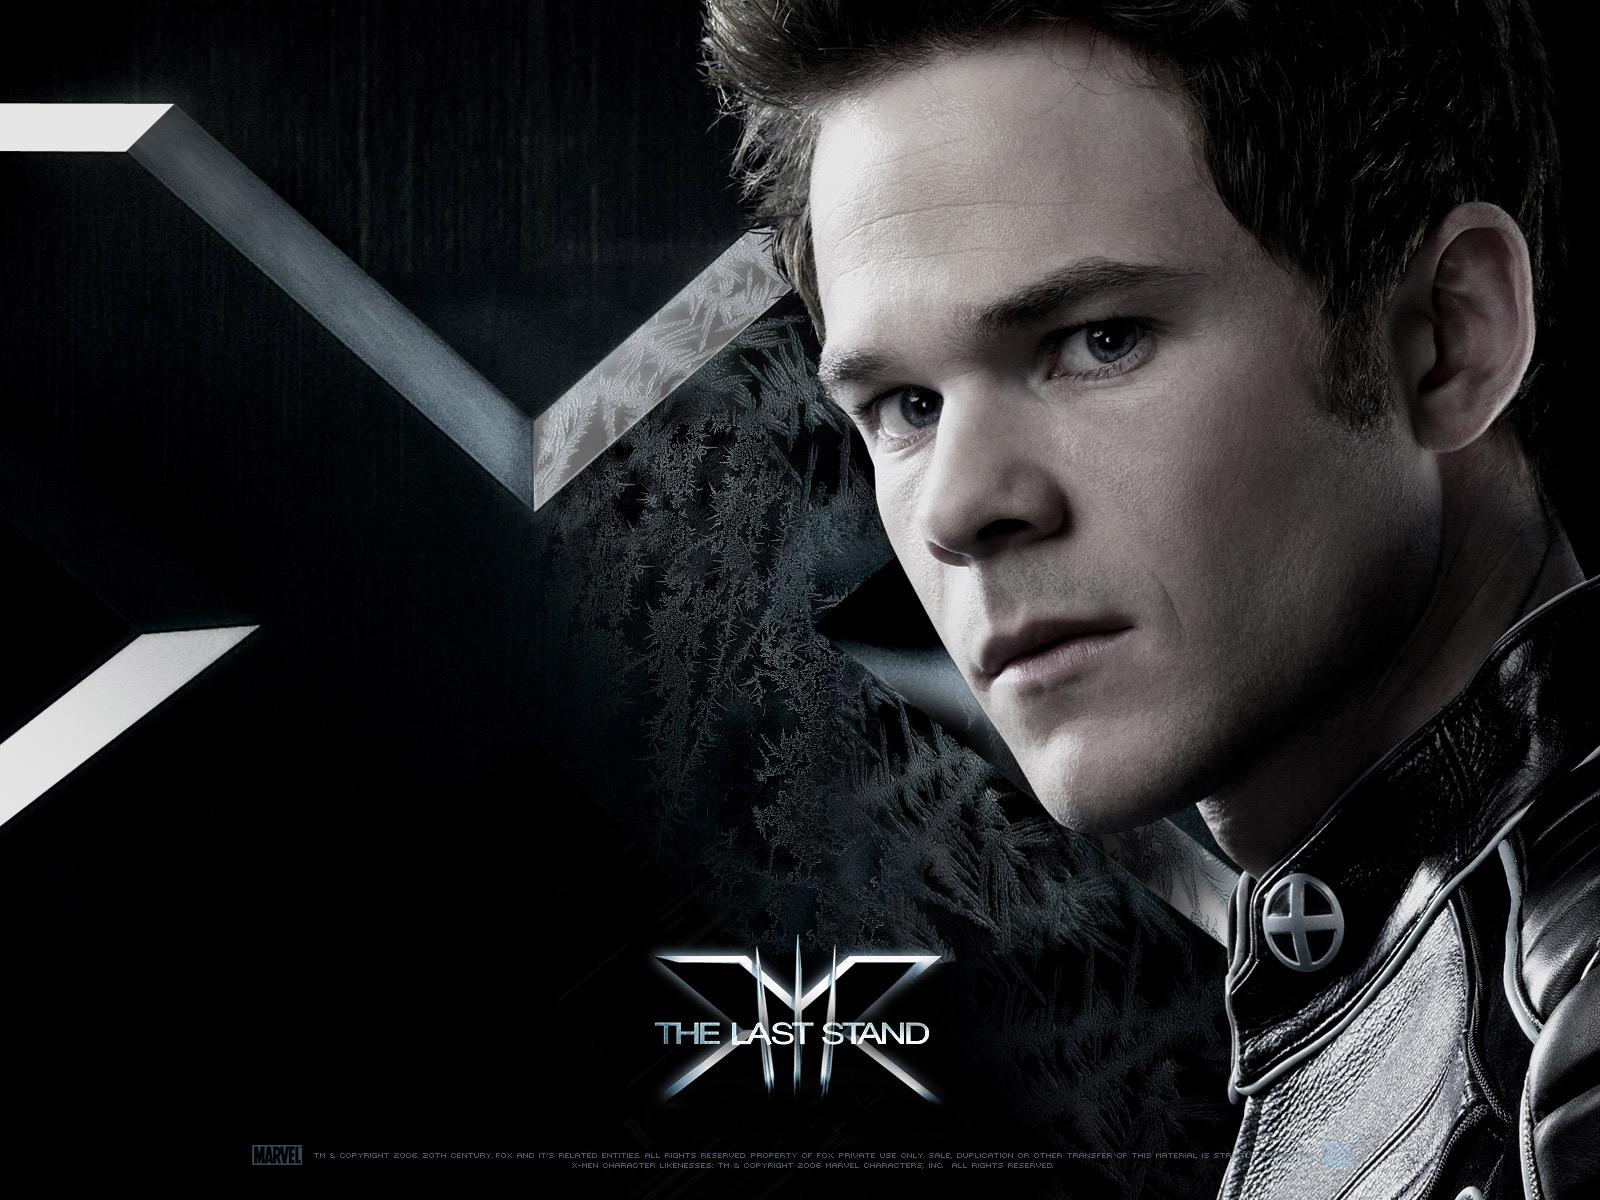 General photo of Shawn Ashmore